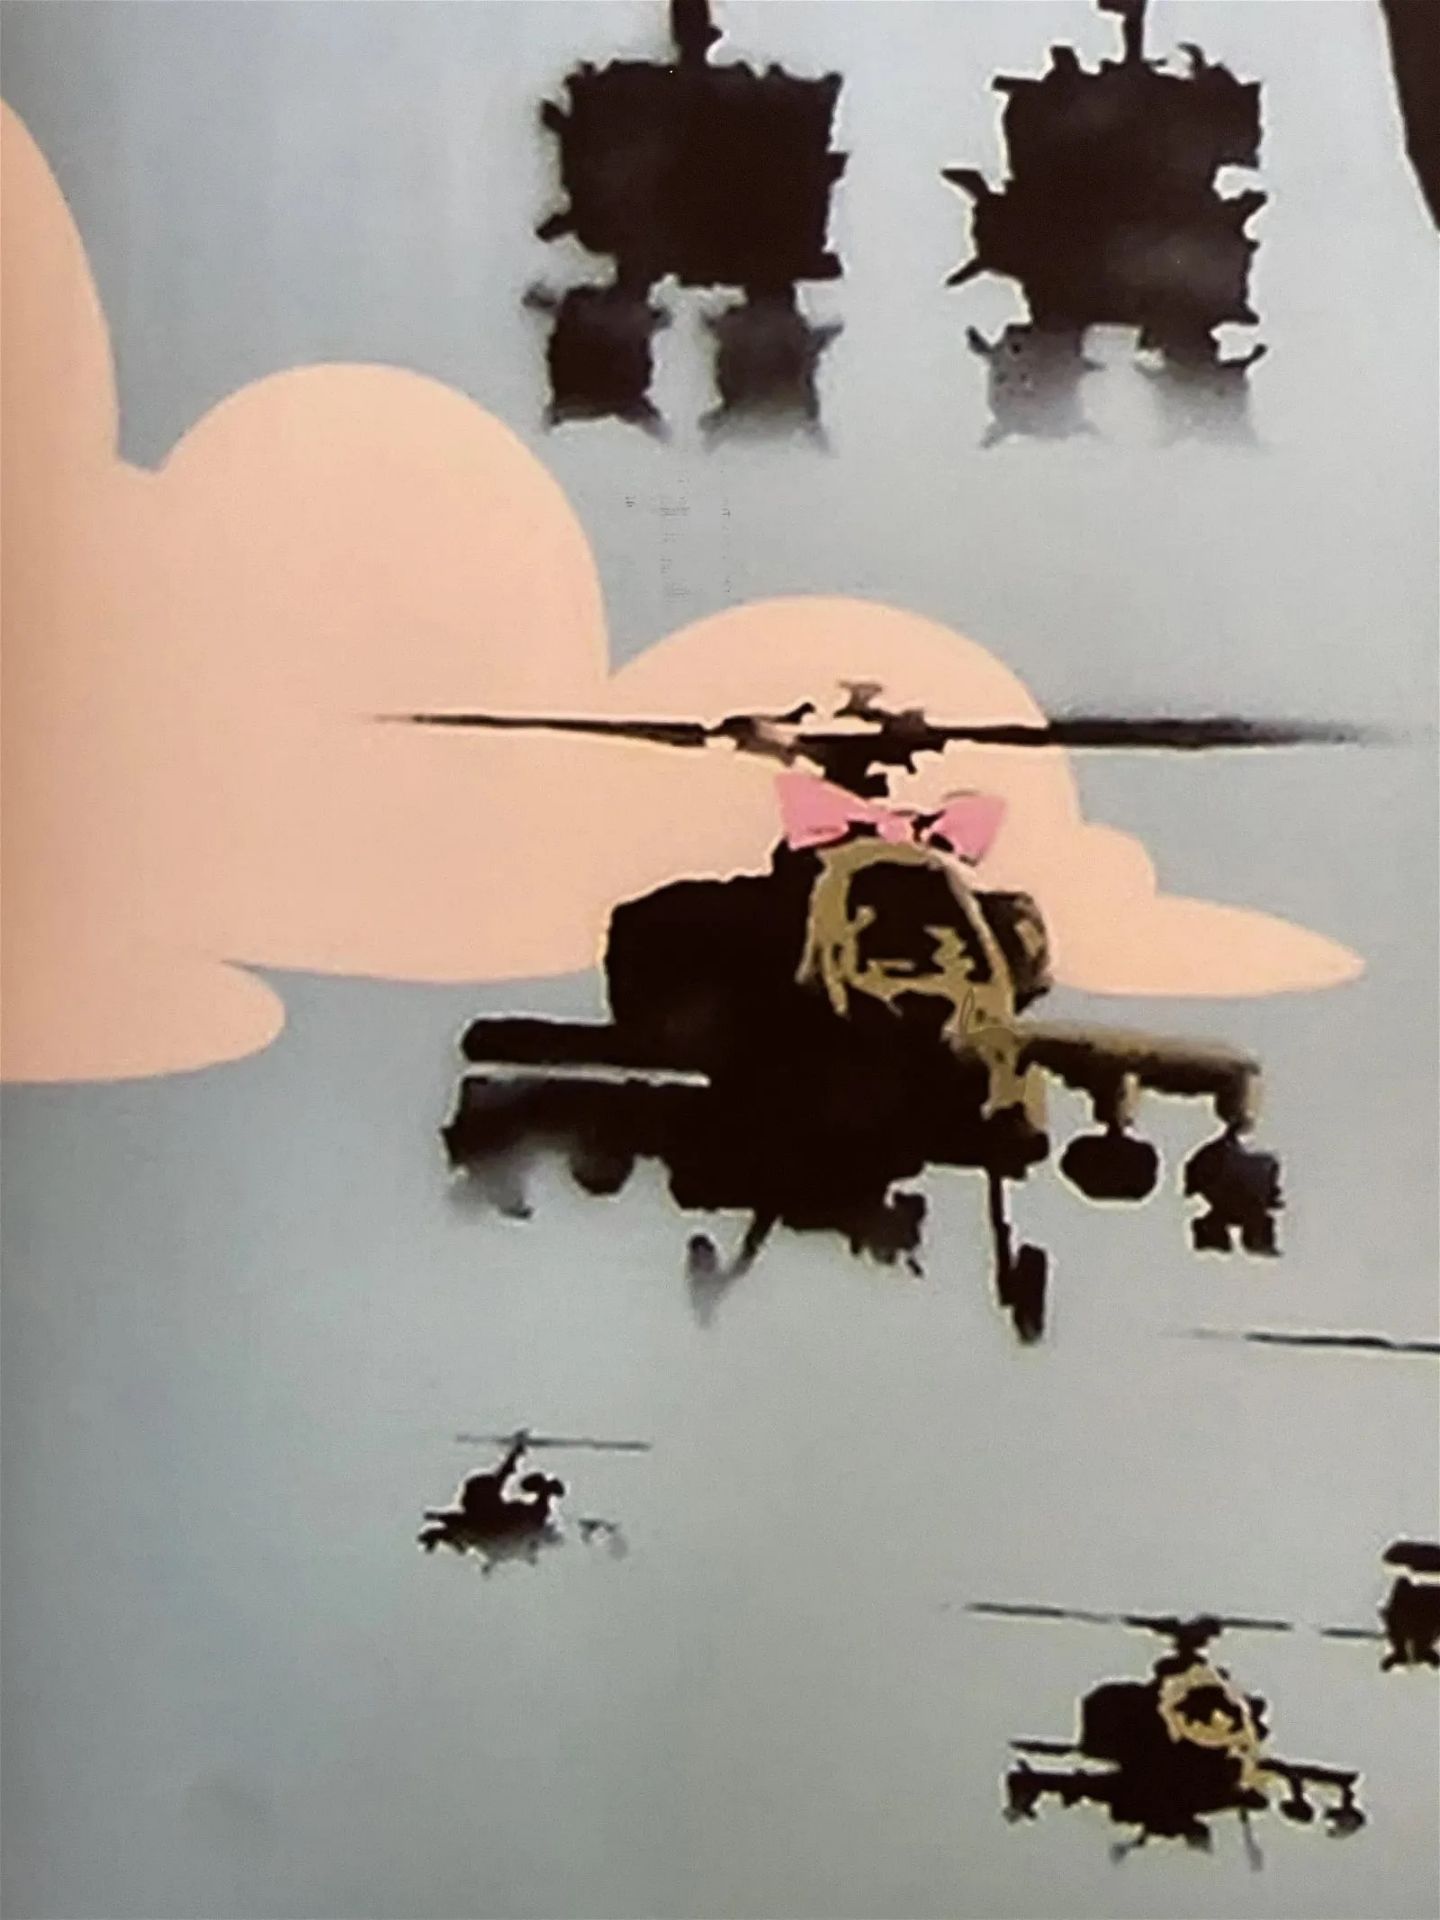 Banksy "Helicopter" Offset Lithograph - Bild 4 aus 8